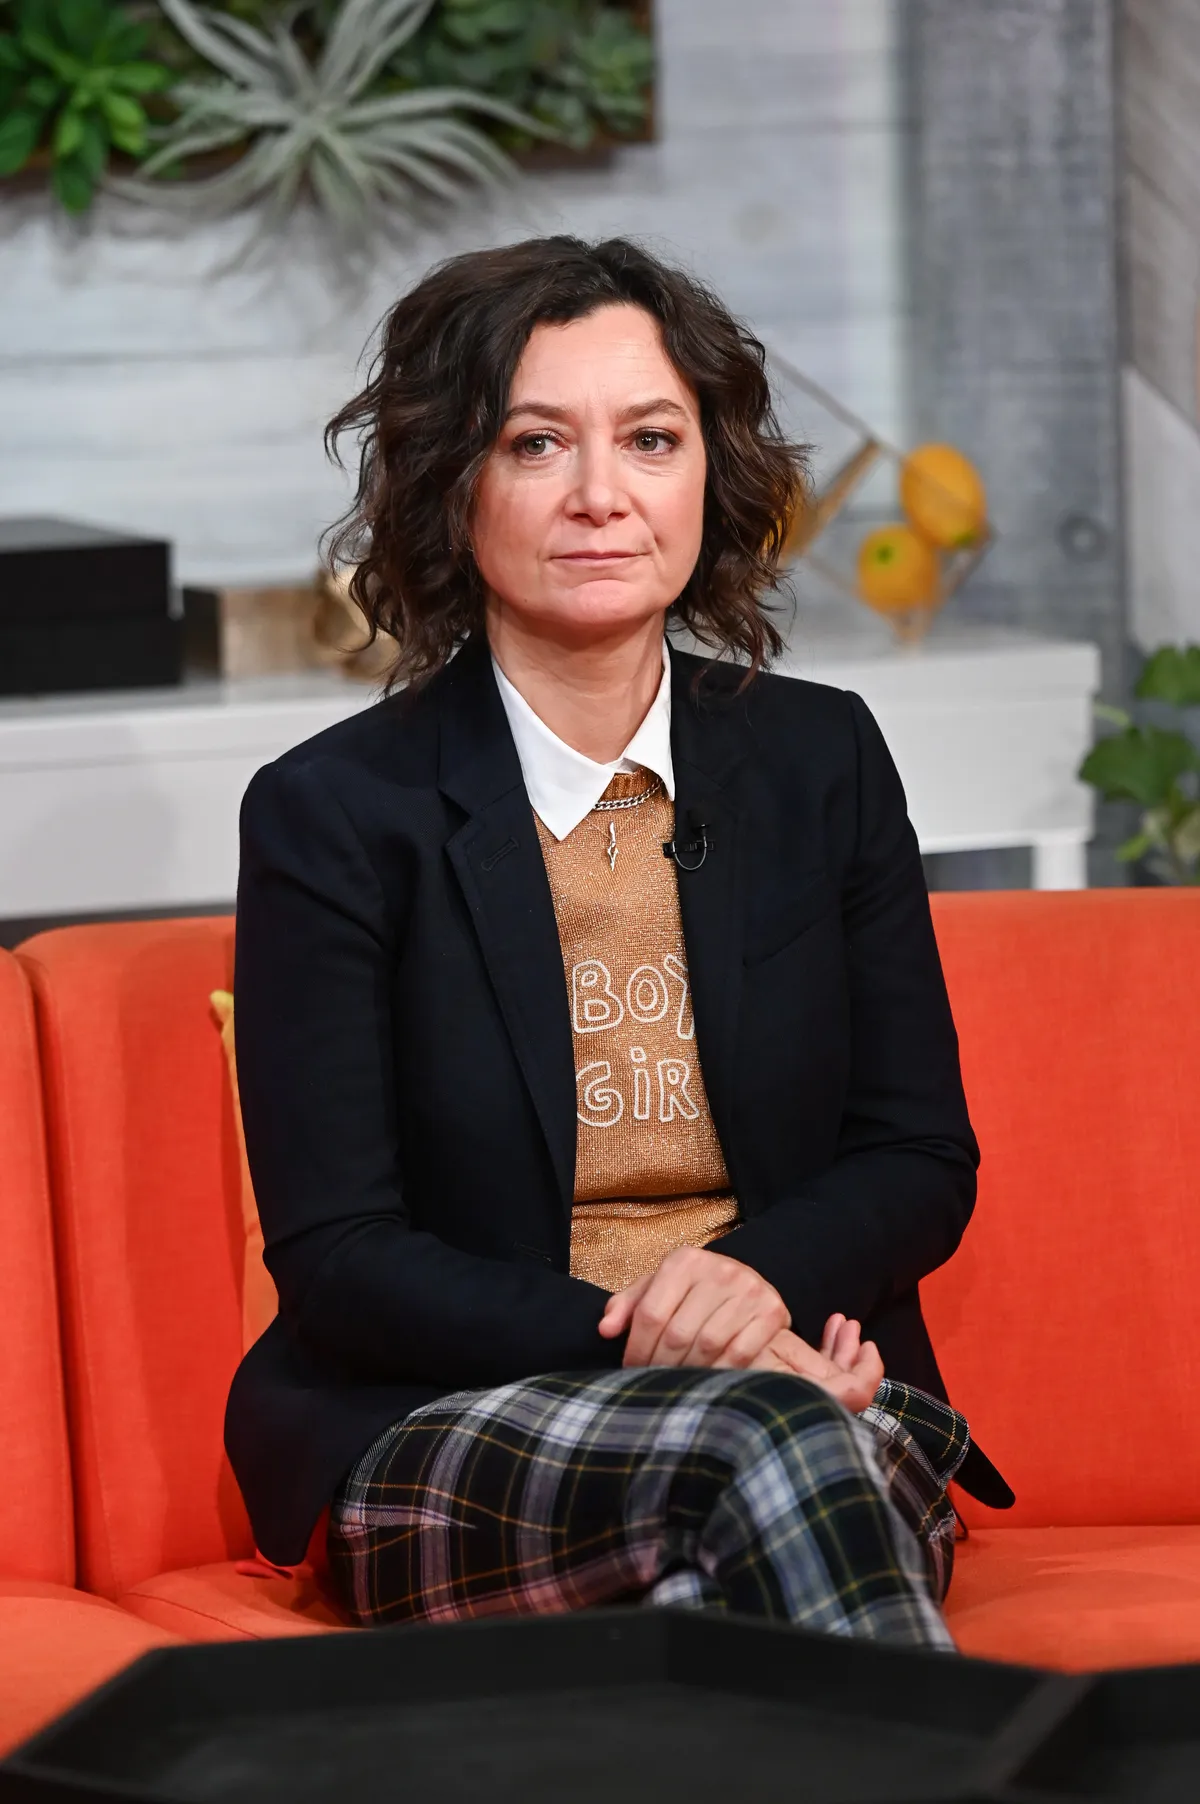 Sara Gilbert am 19. September 2019 in New York City. | Quelle: Getty Images